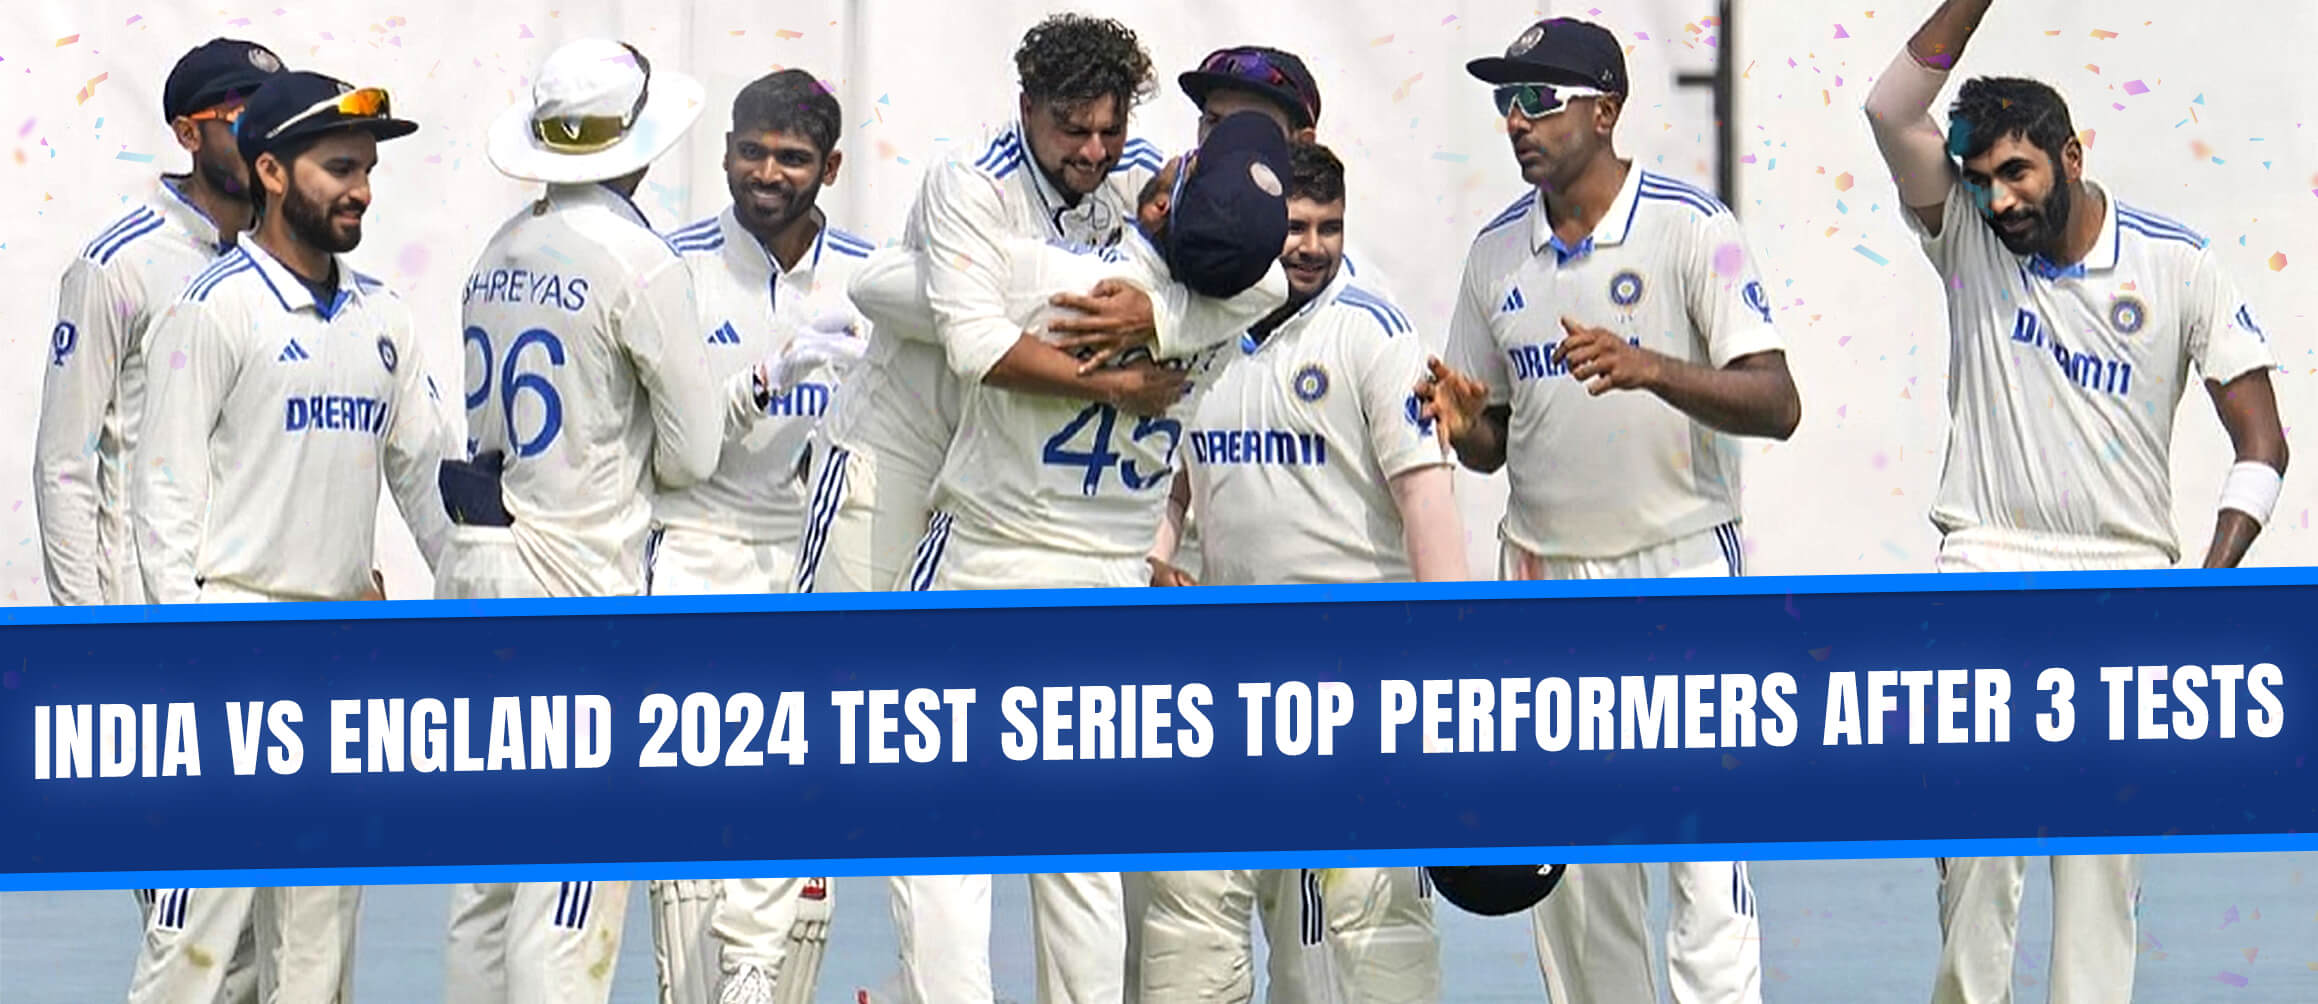 India vs England 2024 Test Series Top Performers After 3 Tests